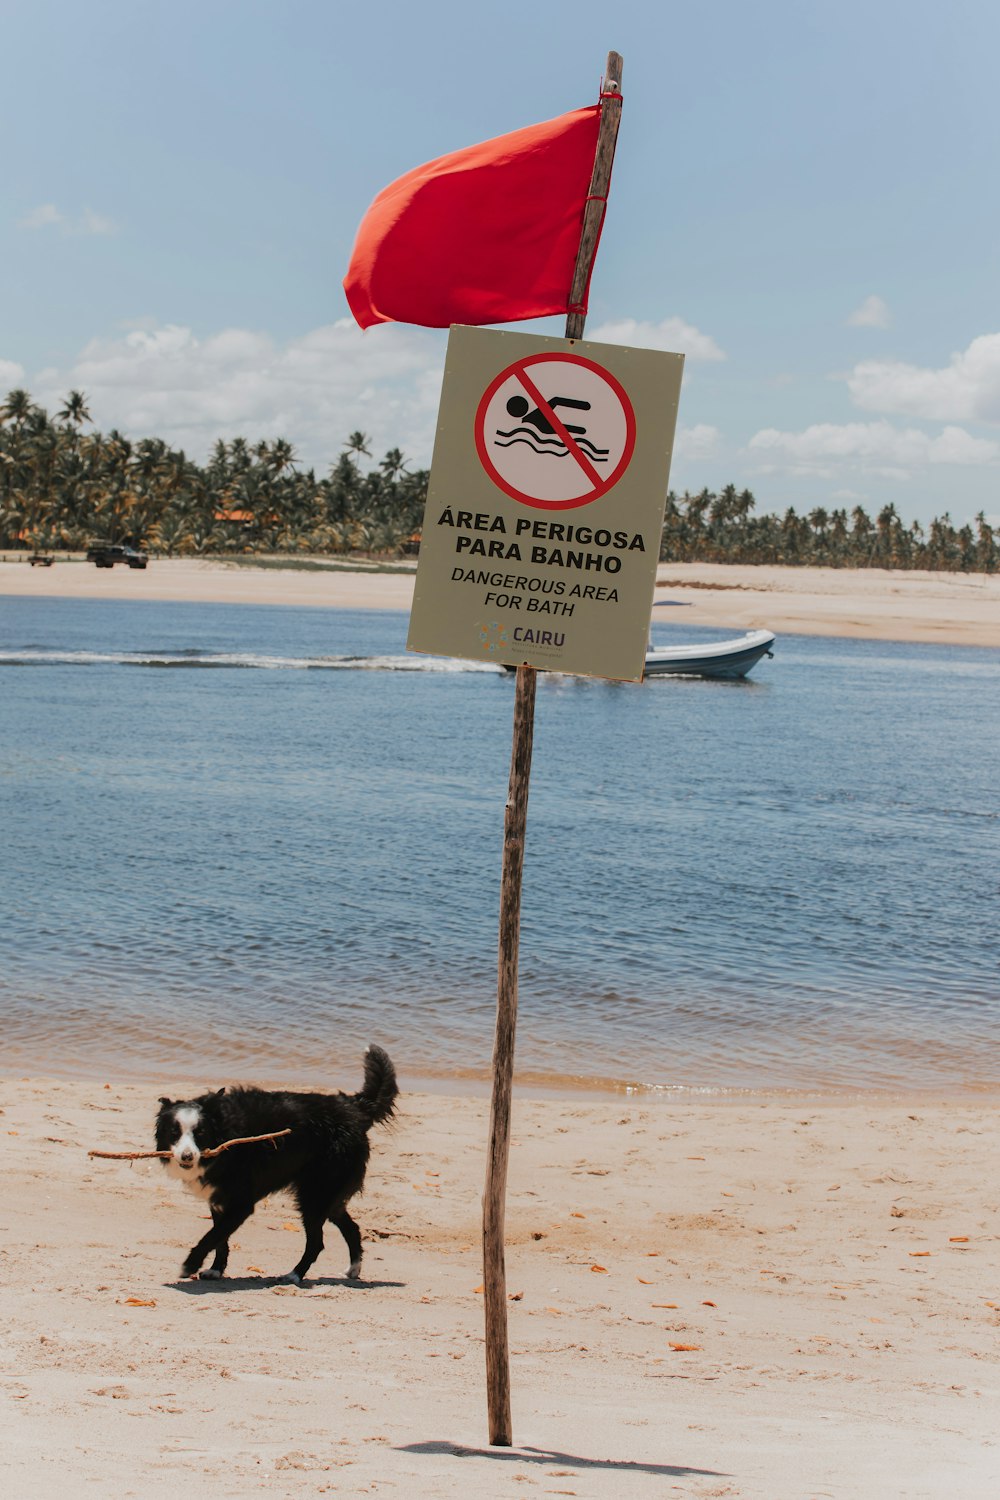 a dog walking on a beach next to a sign